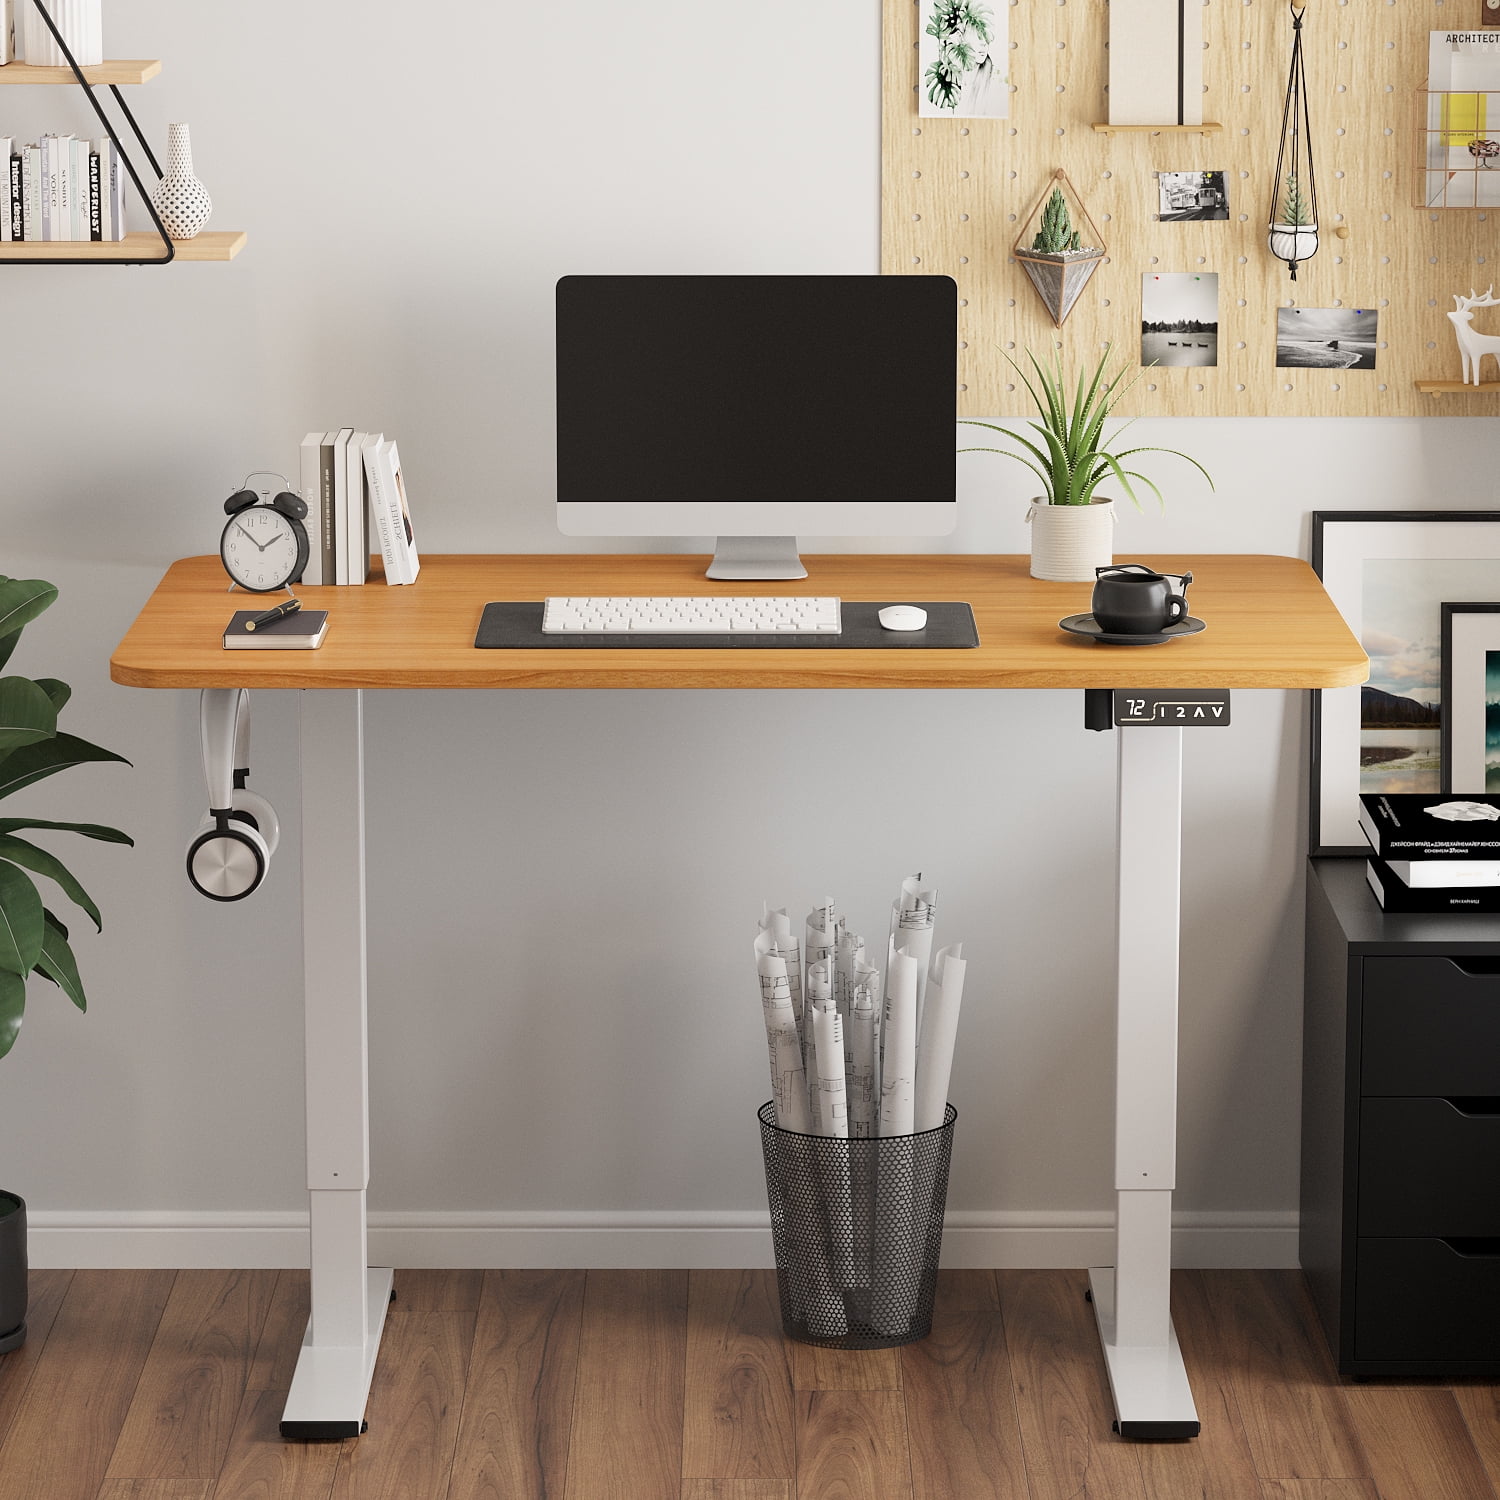 Furmax 55 x 24 Home Office Electric Height Adjustable Standing Desk 